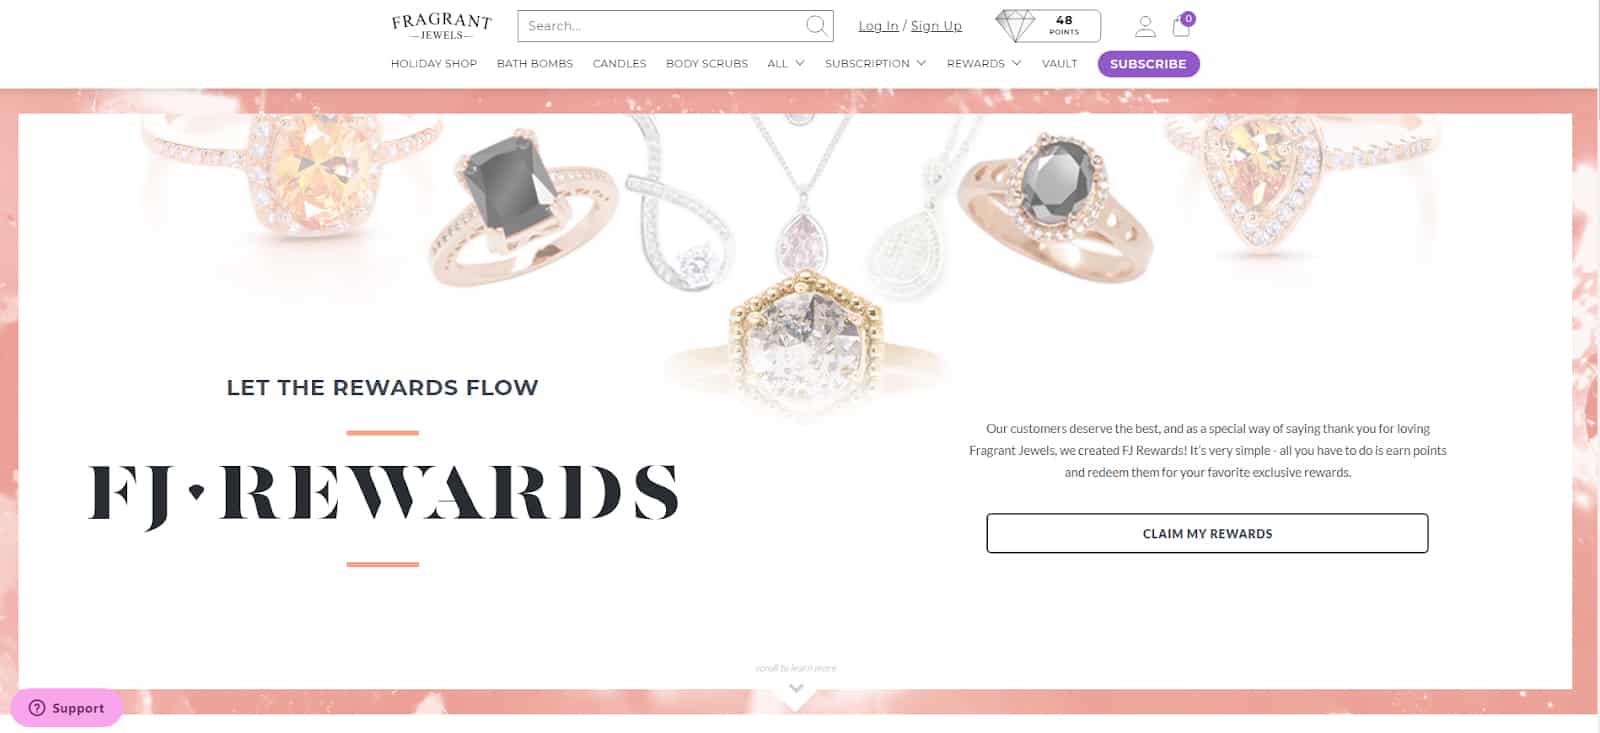 Image of Fragrant Jewels home page with rewards button for customers.